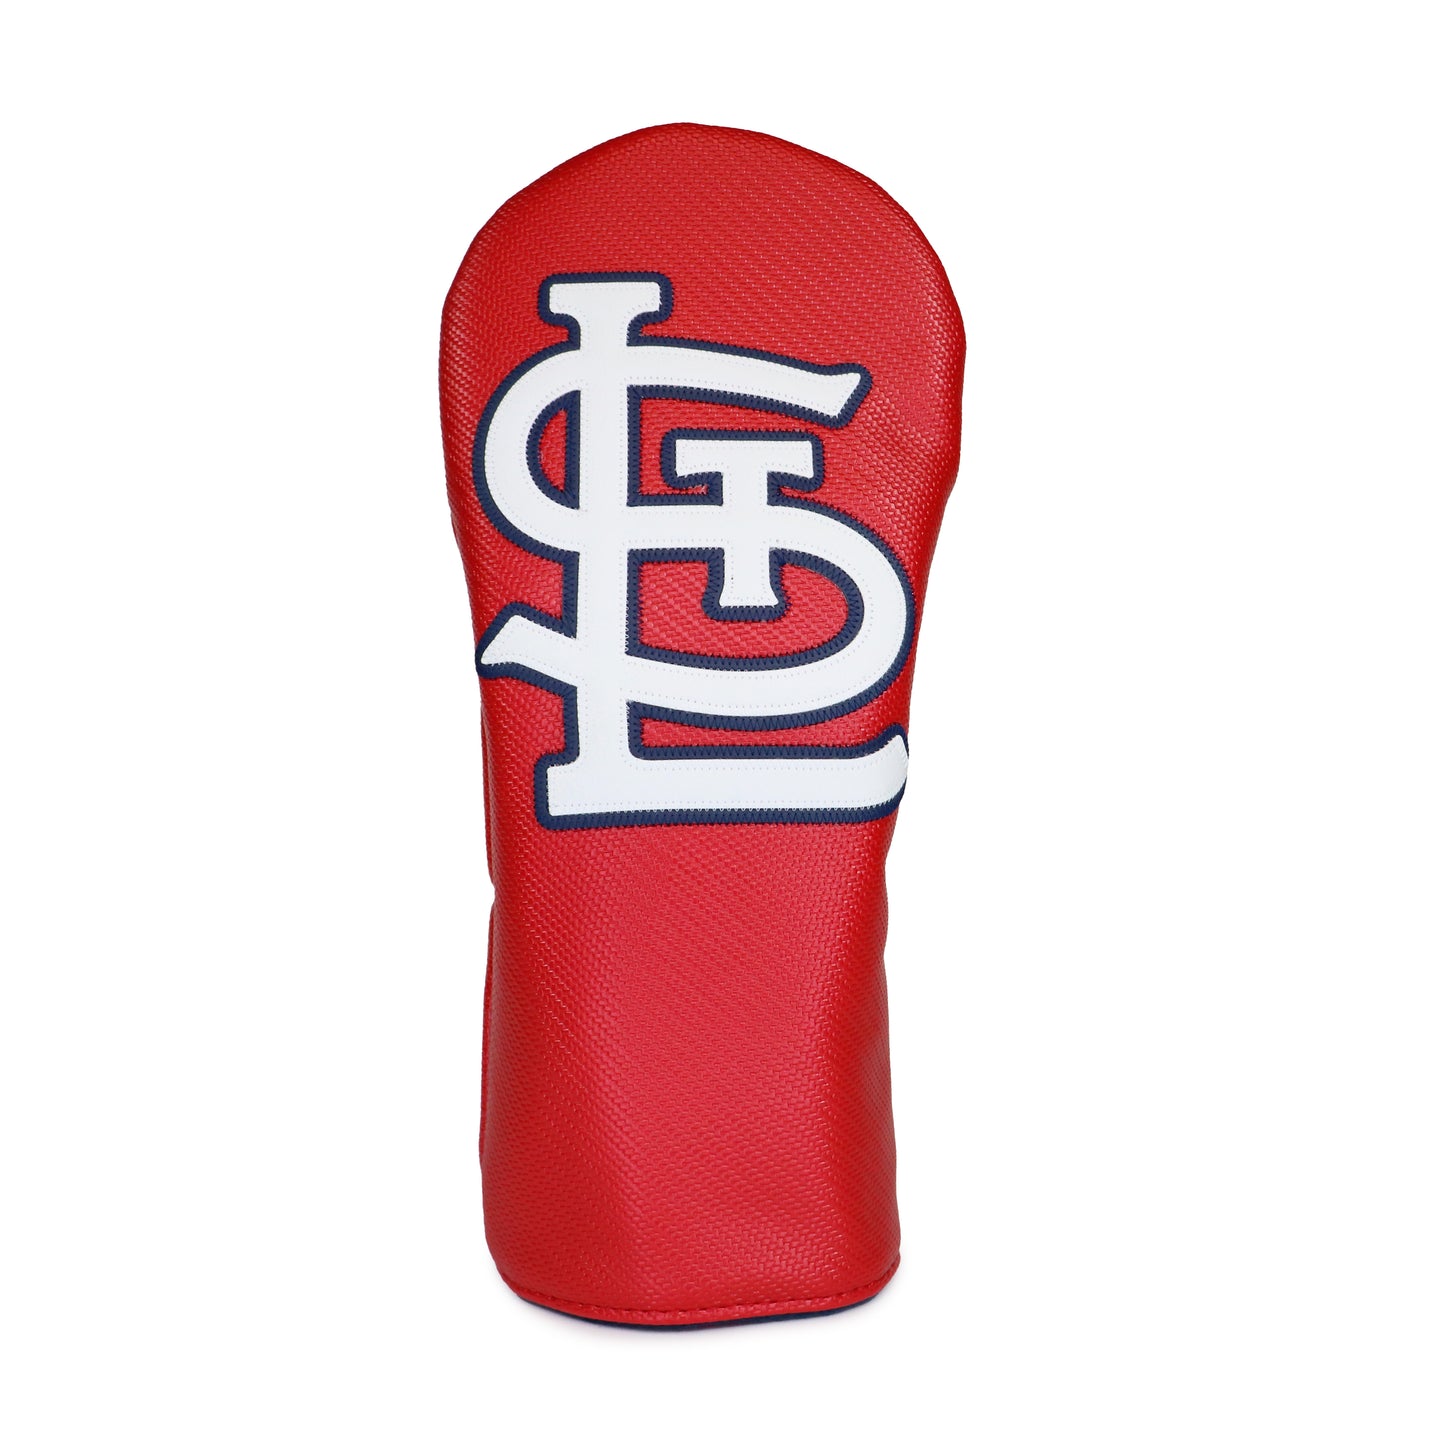 St. Louis Cardinals Headcovers – EP Headcovers